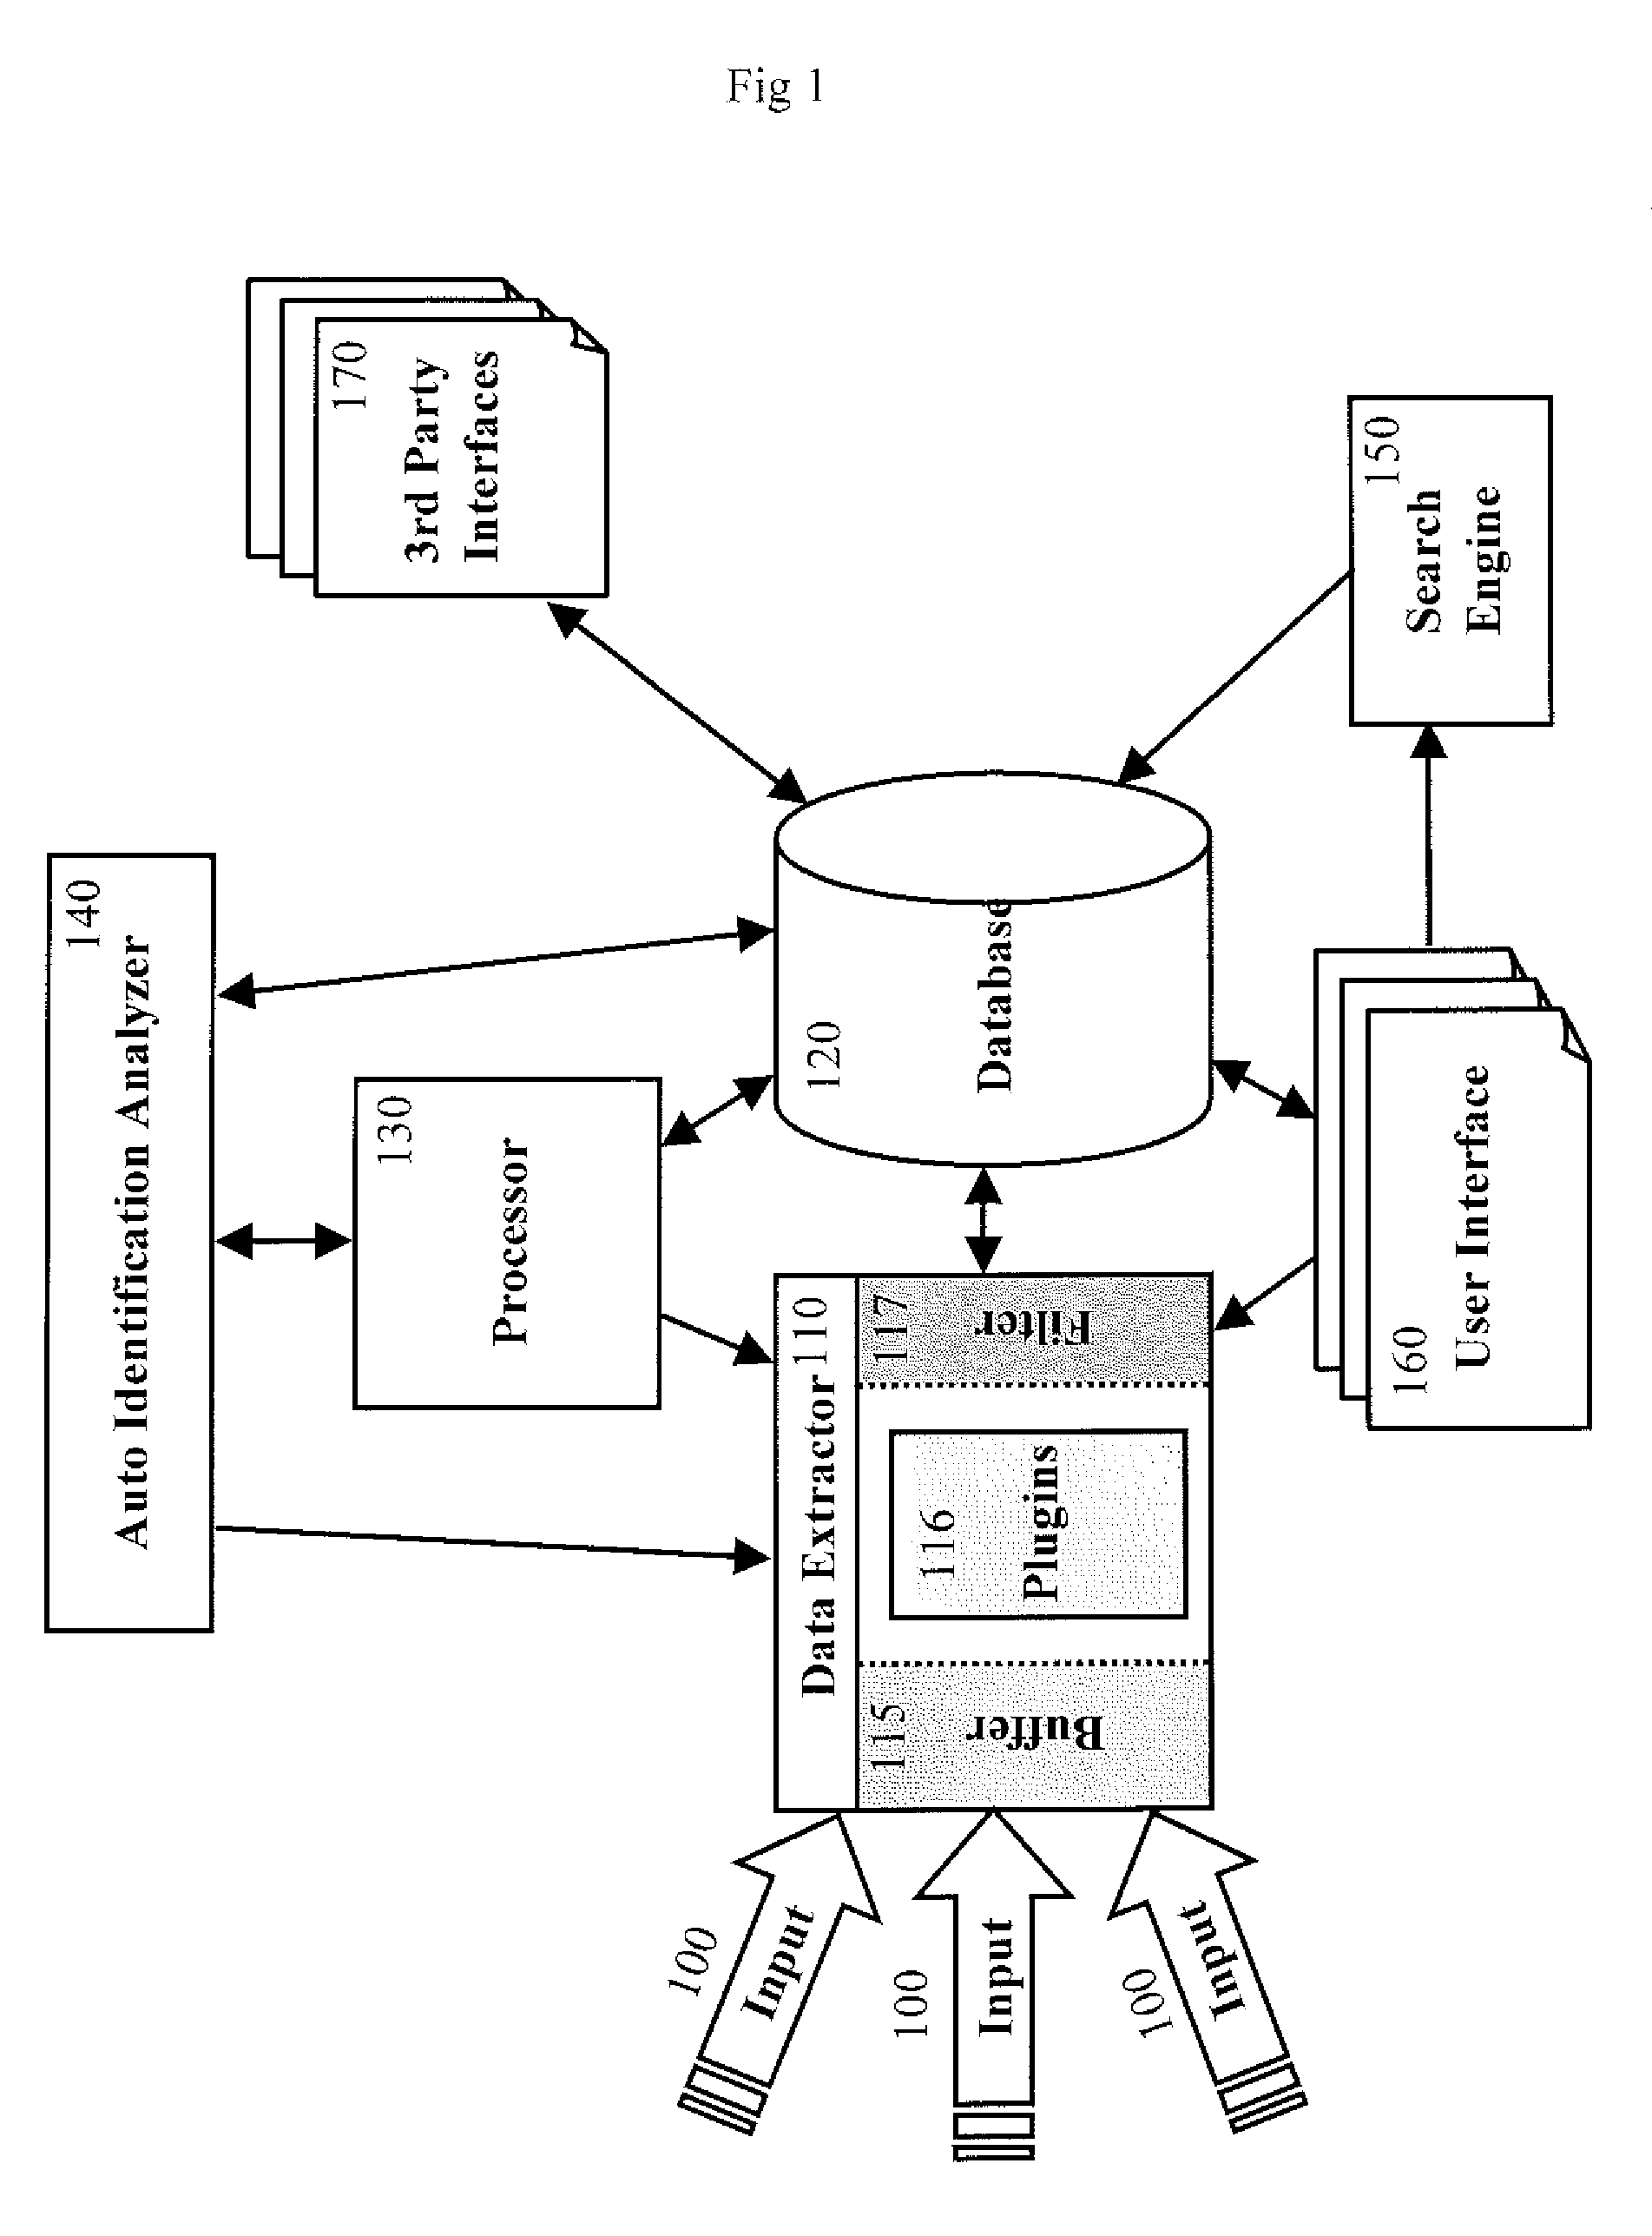 Method for Analyzing Activities Over Information Networks